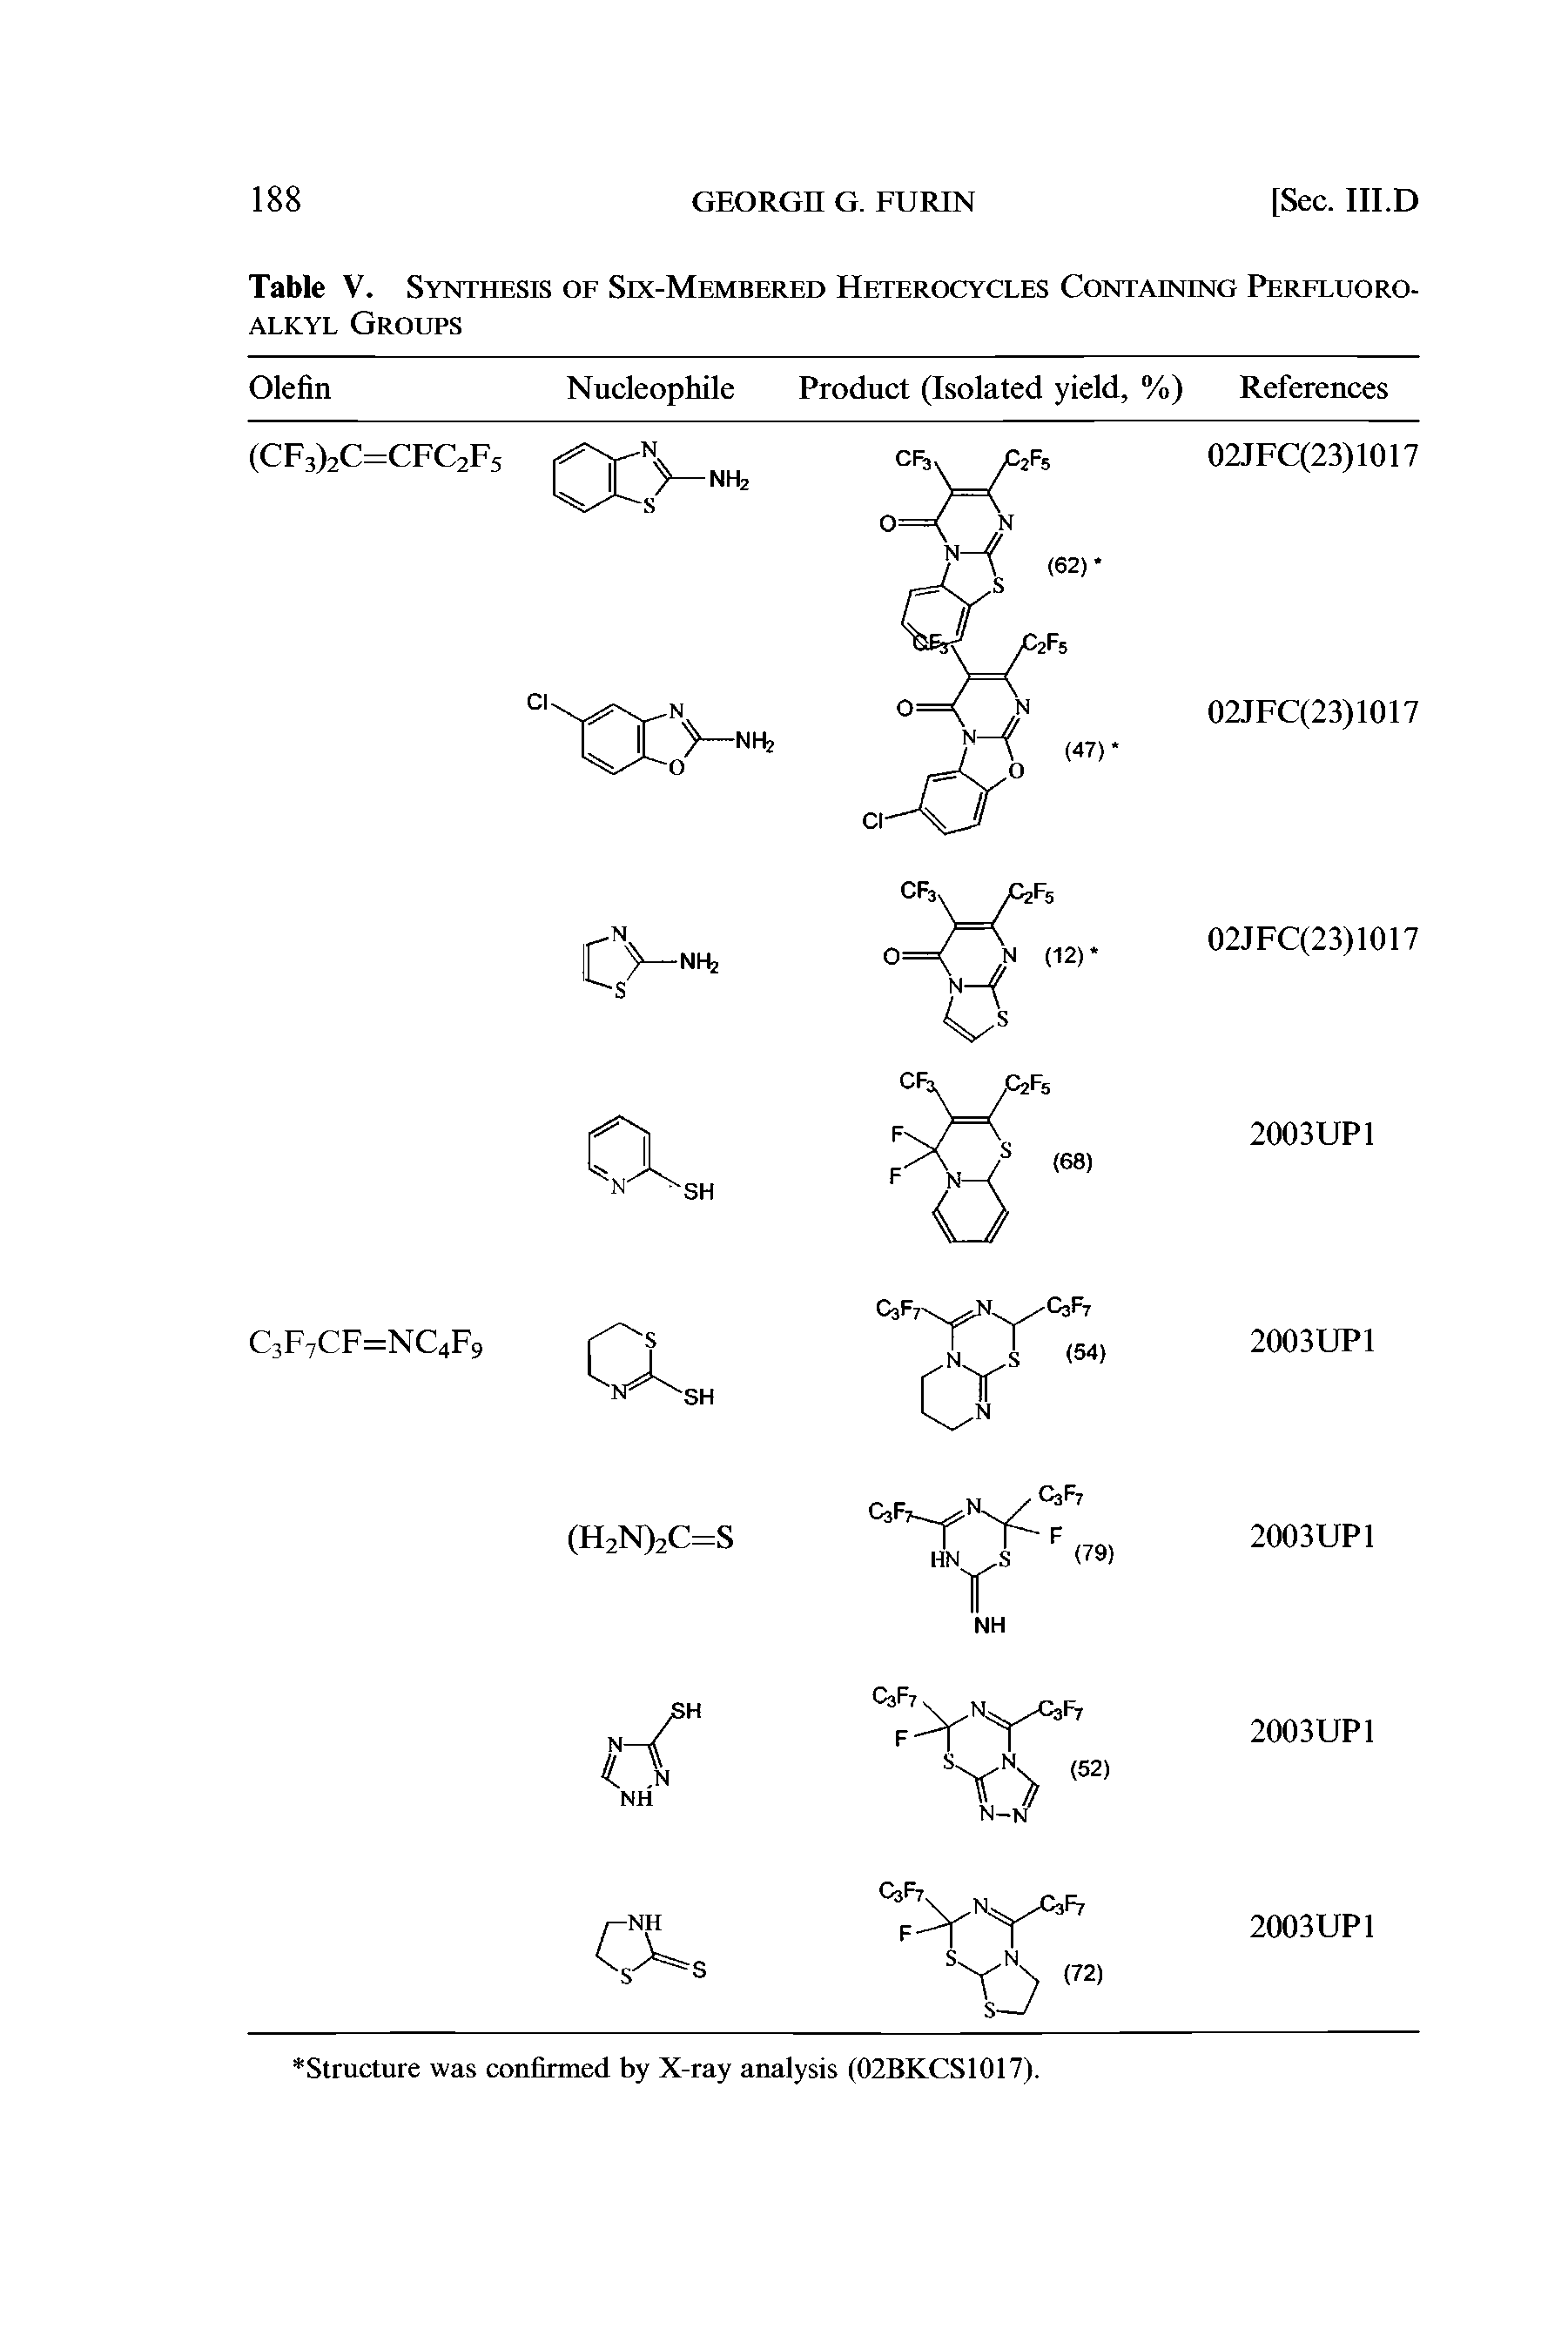 Table V. Synthesis of Six-Membered Heterocycles Containing Perfluoro-alkyl Groups...